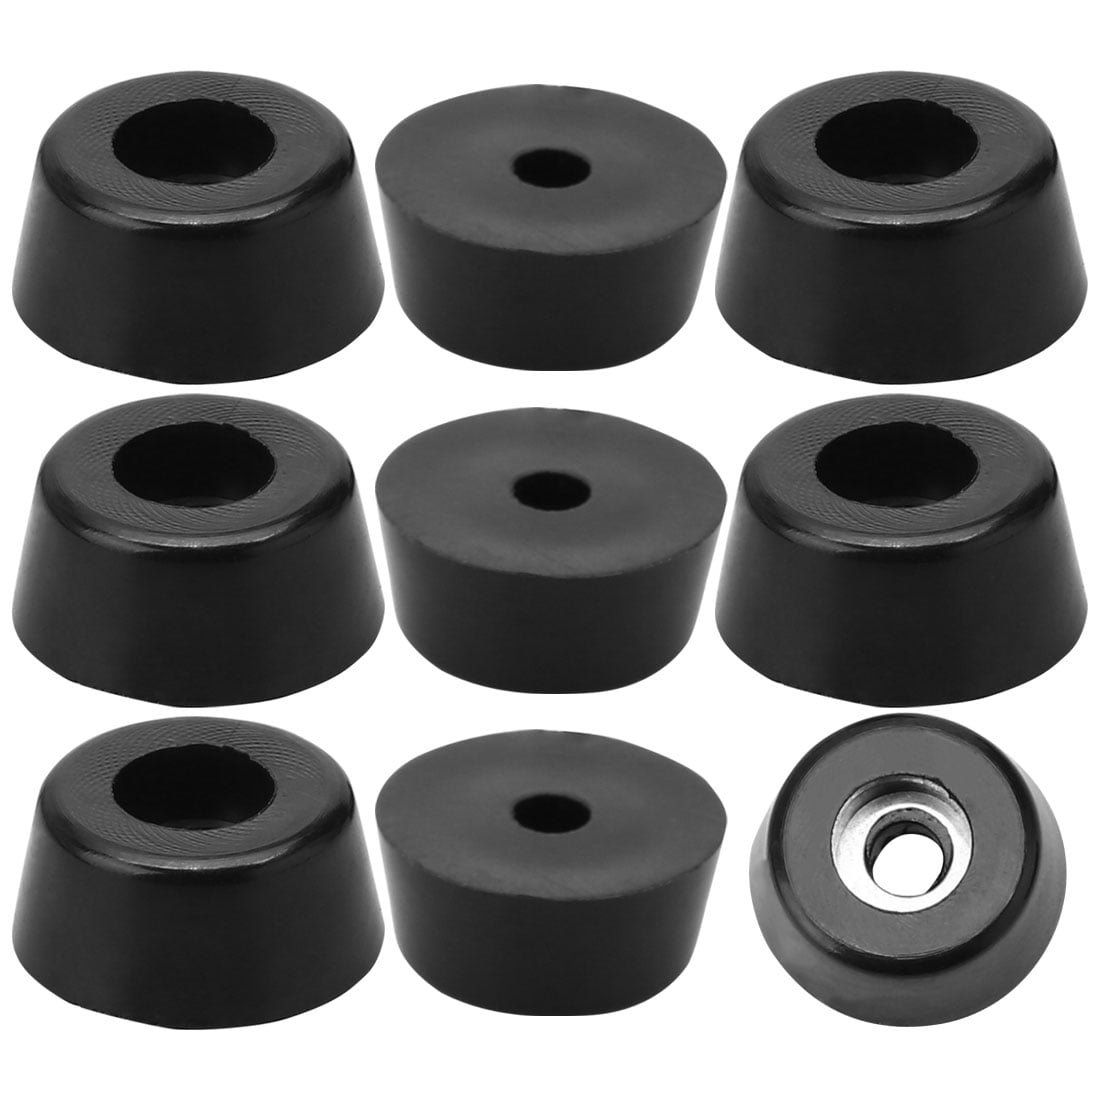 D24x20xH13mm uxcell 34pcs Rubber Feet Bumper Buffer Feet Furniture Table Cabinet Leg Pads Anti-slip with Metal Washer